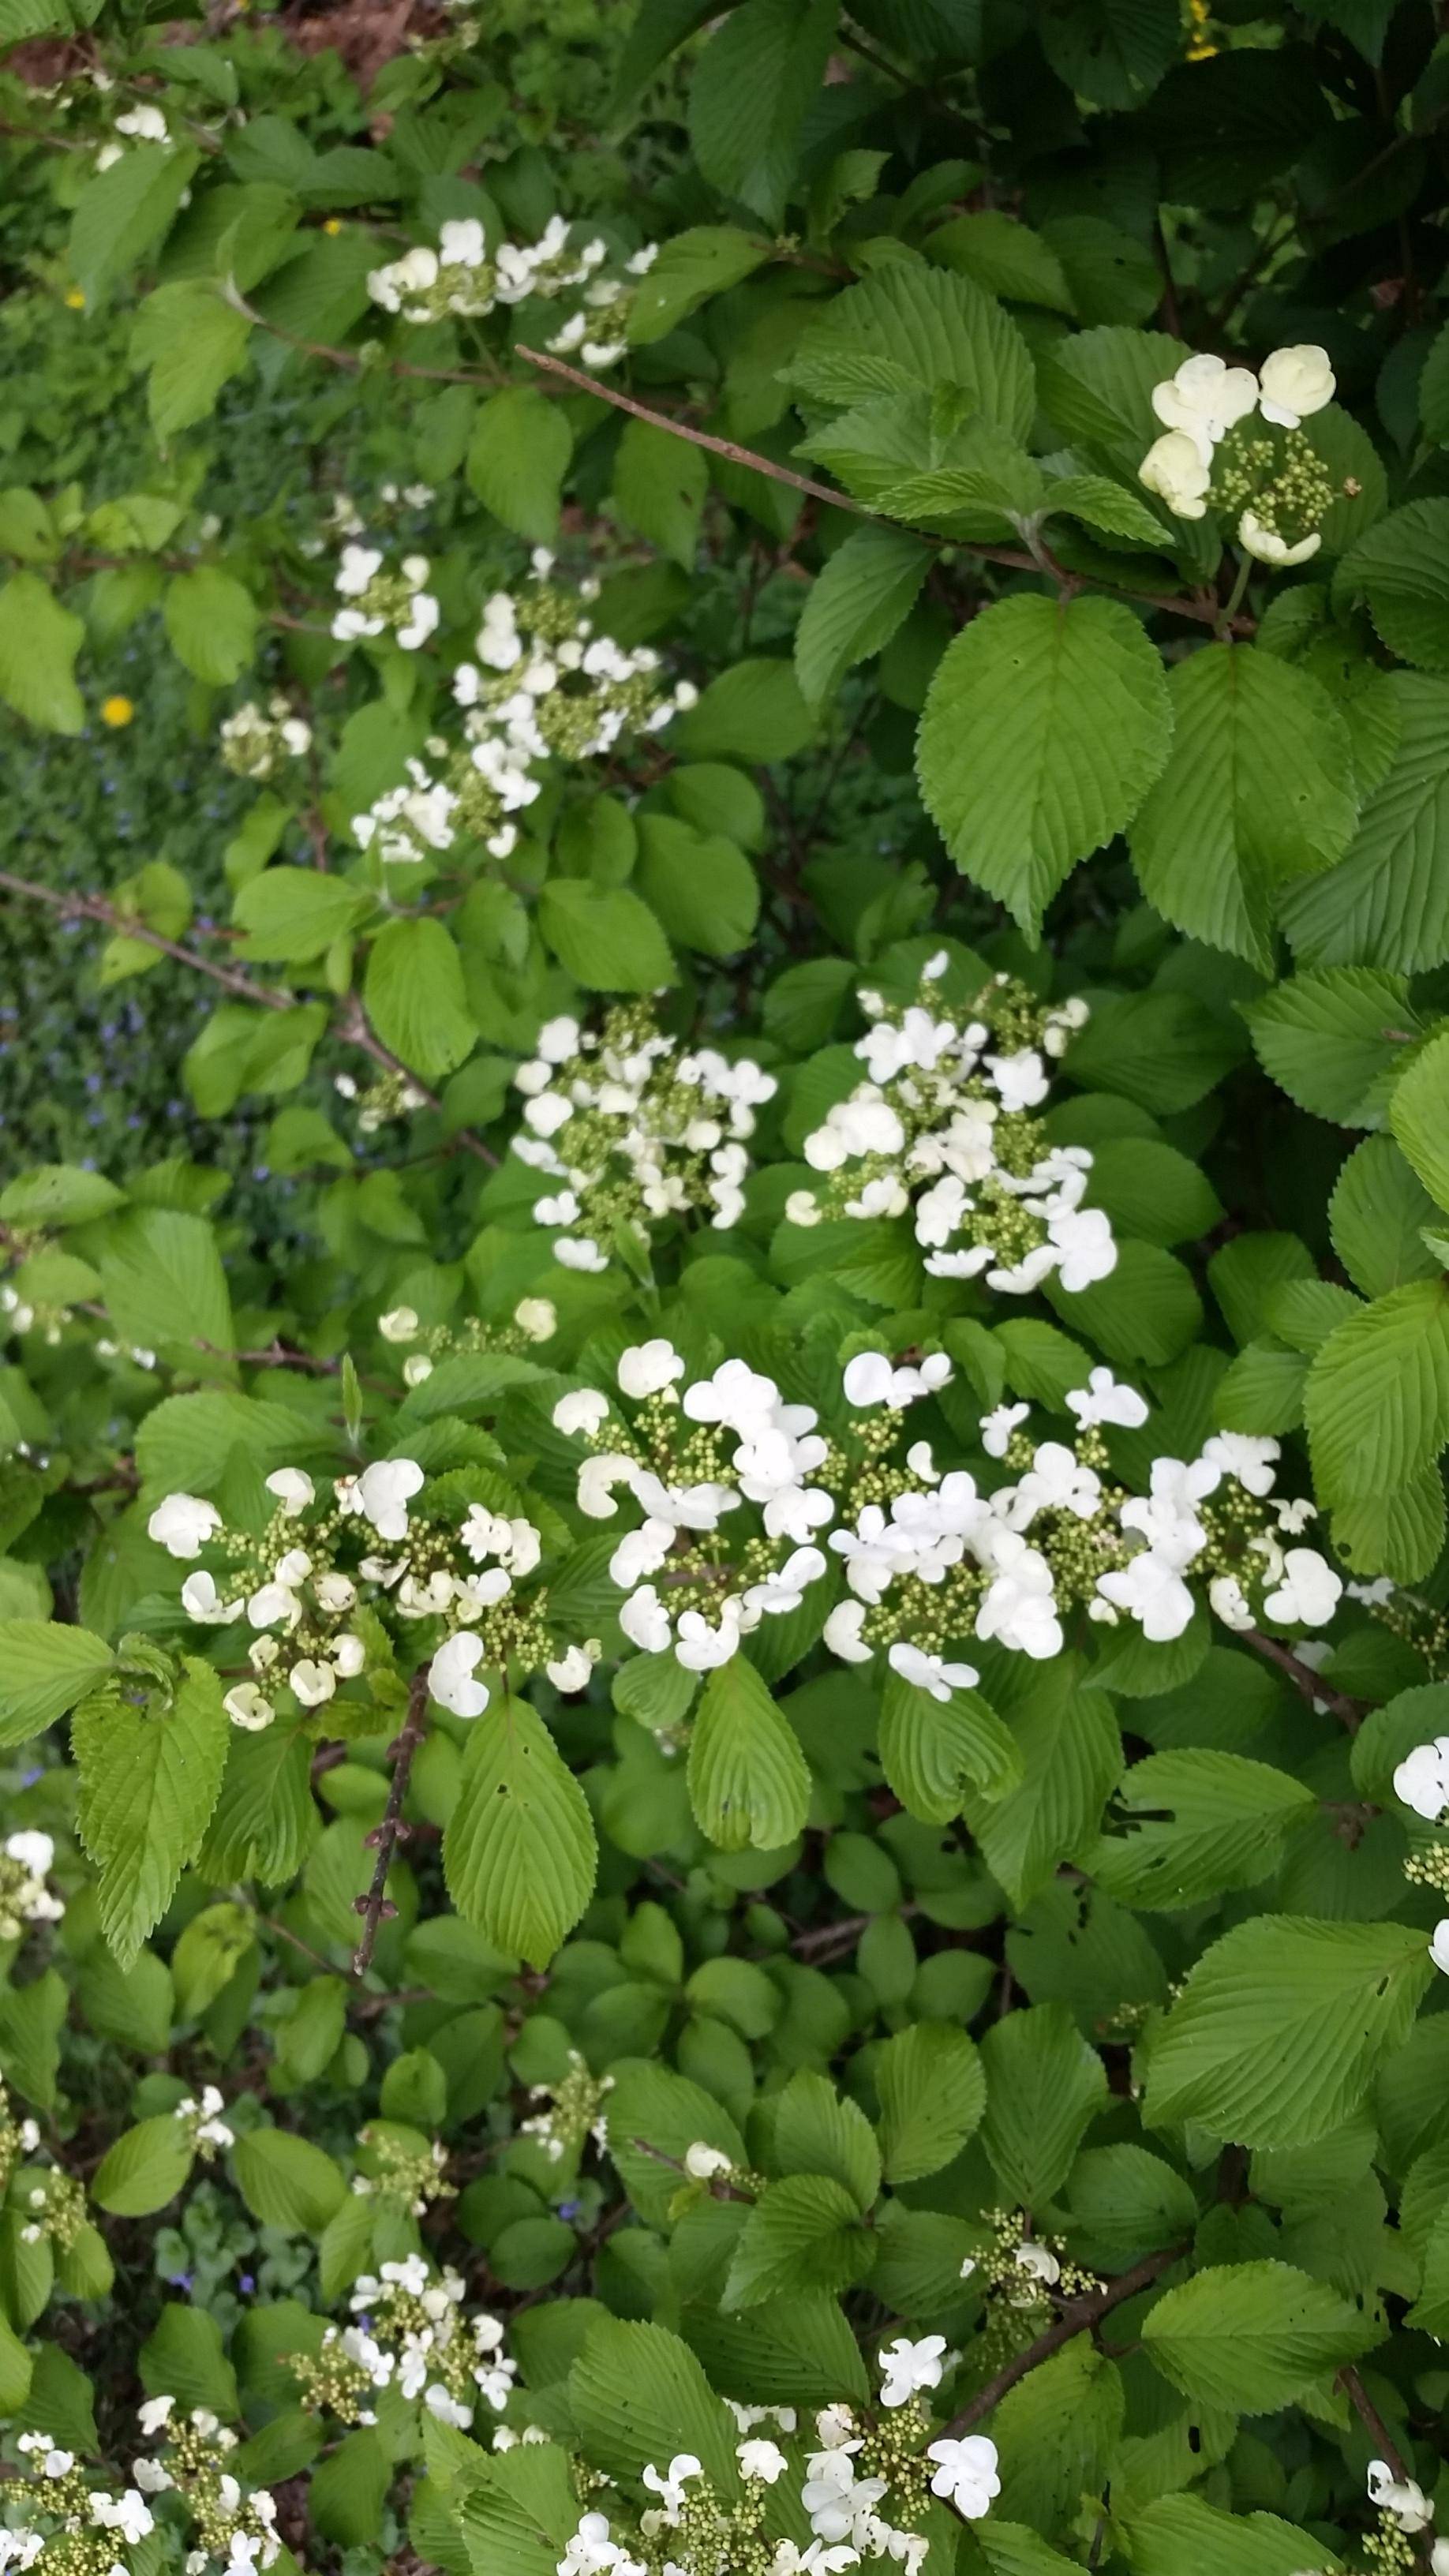 identification - What is this shrub with clumps of small white ...